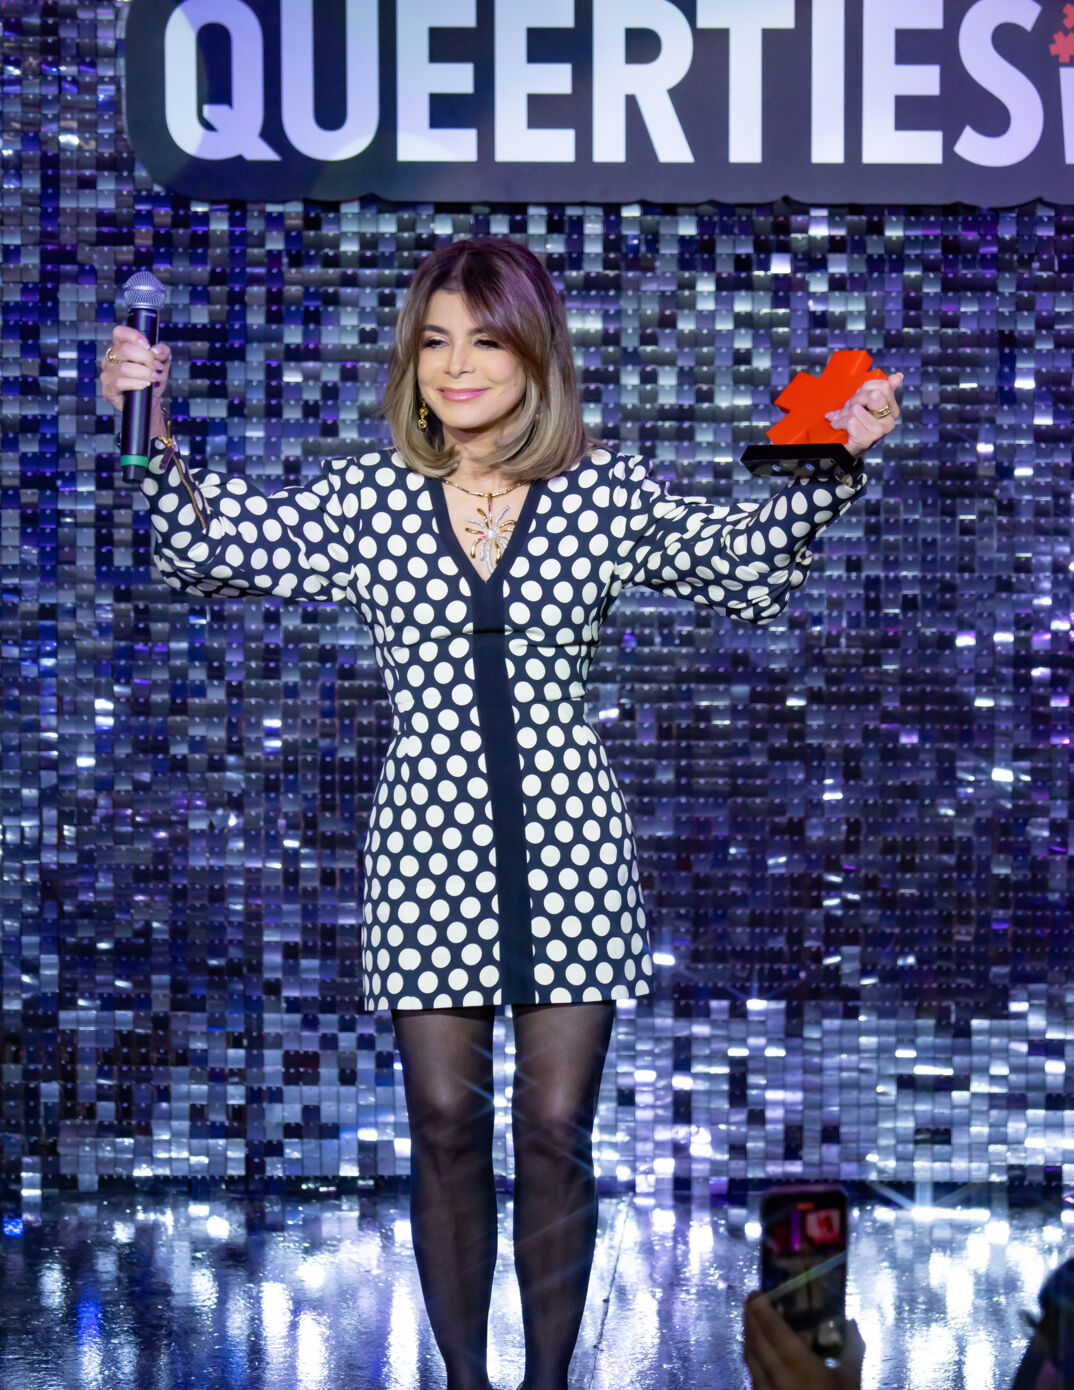 Paula Abdul holds up her arms and smiles while accepting an award at the 2024 Queerties Awards. She wears a black and white polka dot dress and black tights.